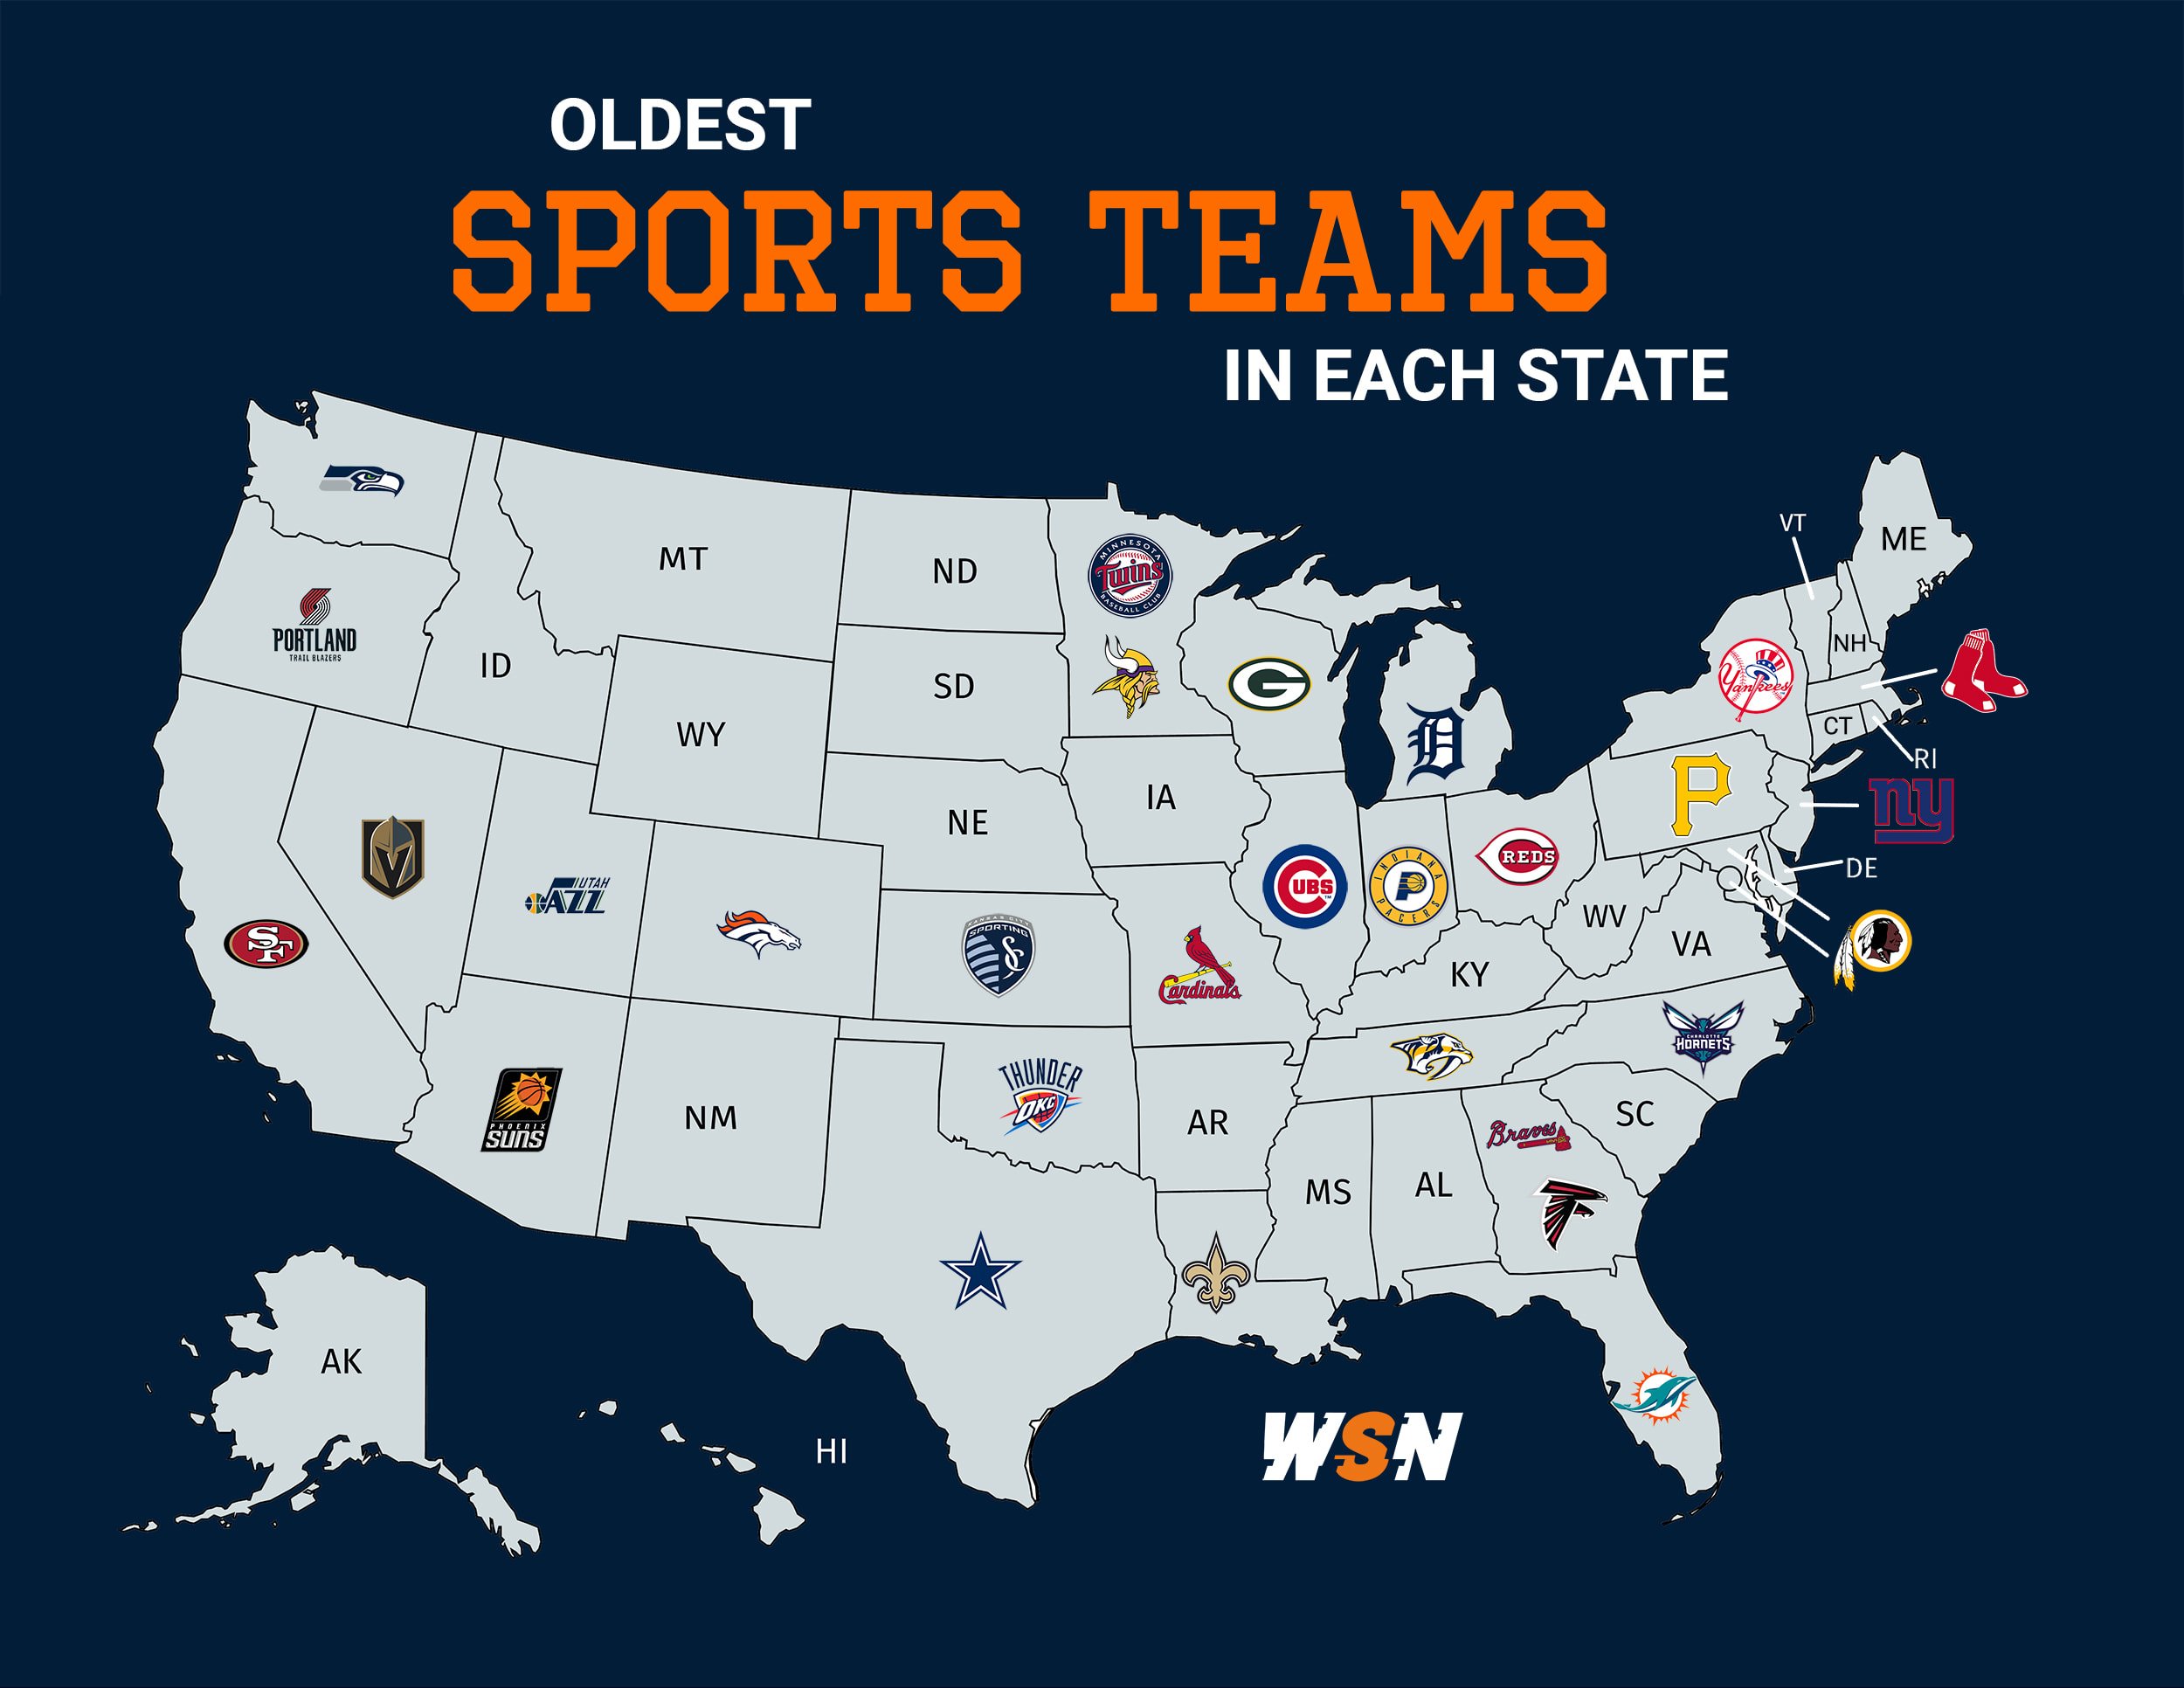 Oldest Sports Teams in the US - State by State [MAP]